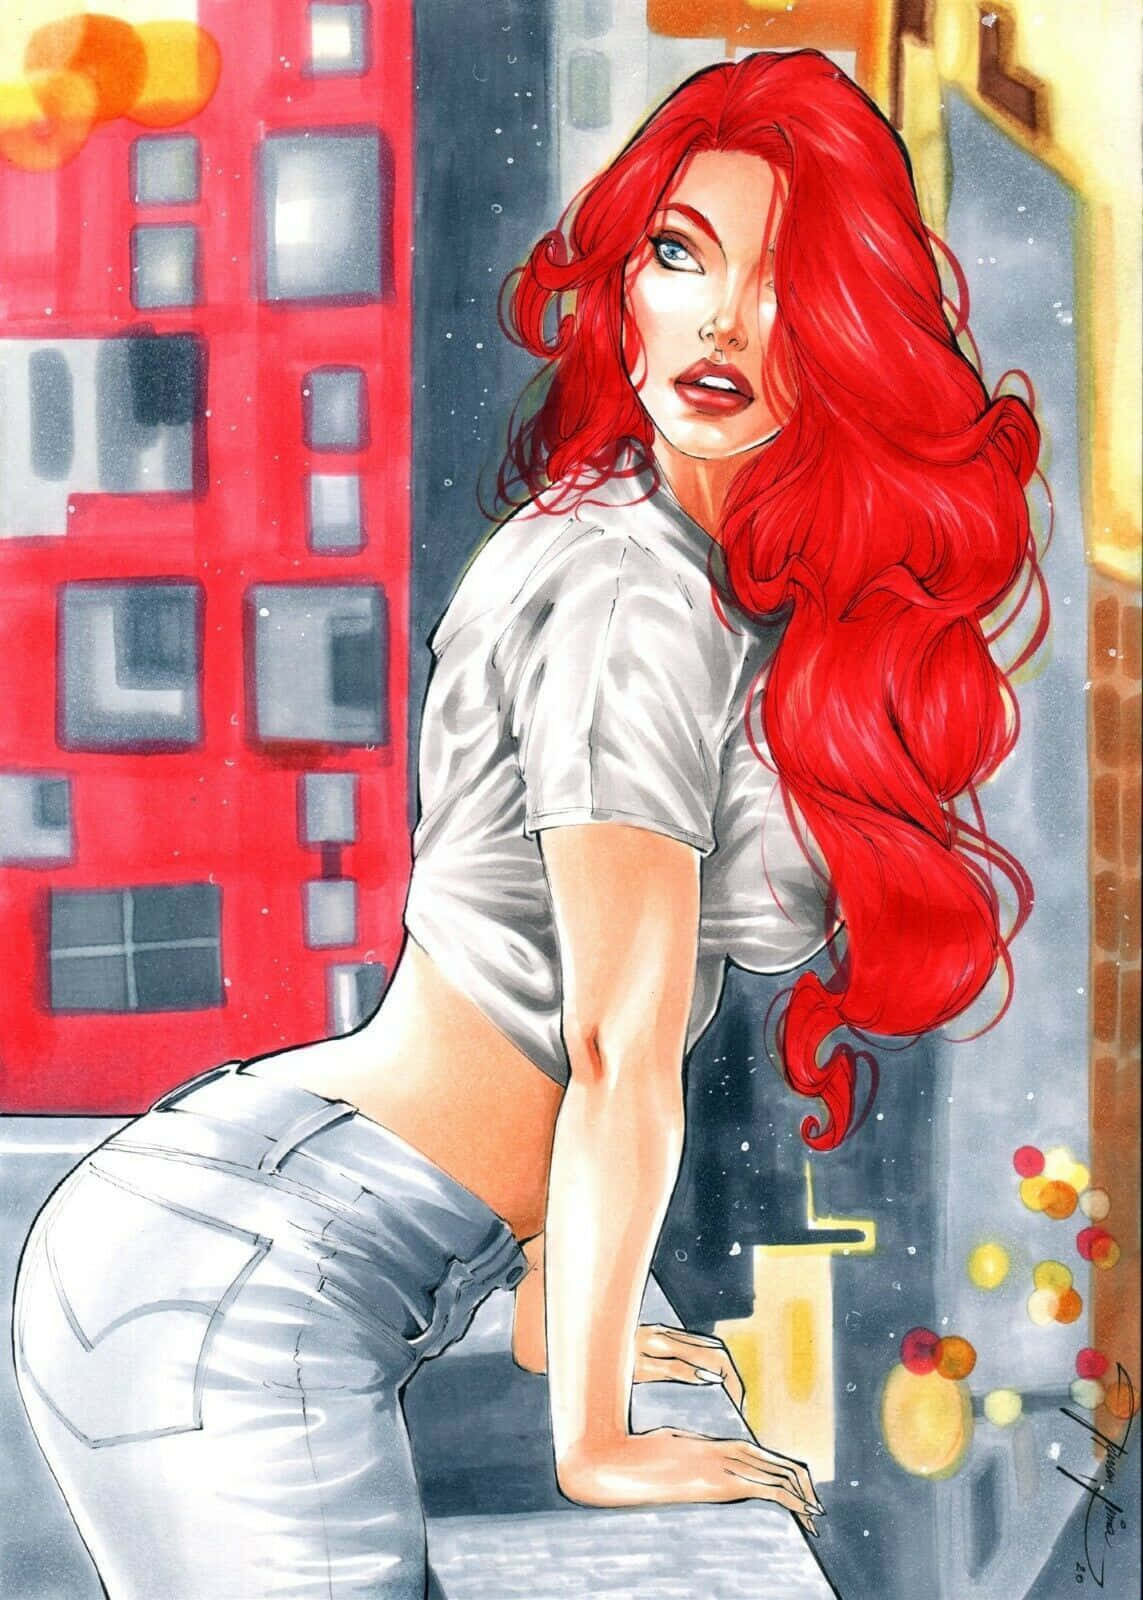 Stunning portrait of Mary Jane in a stylish outfit Wallpaper